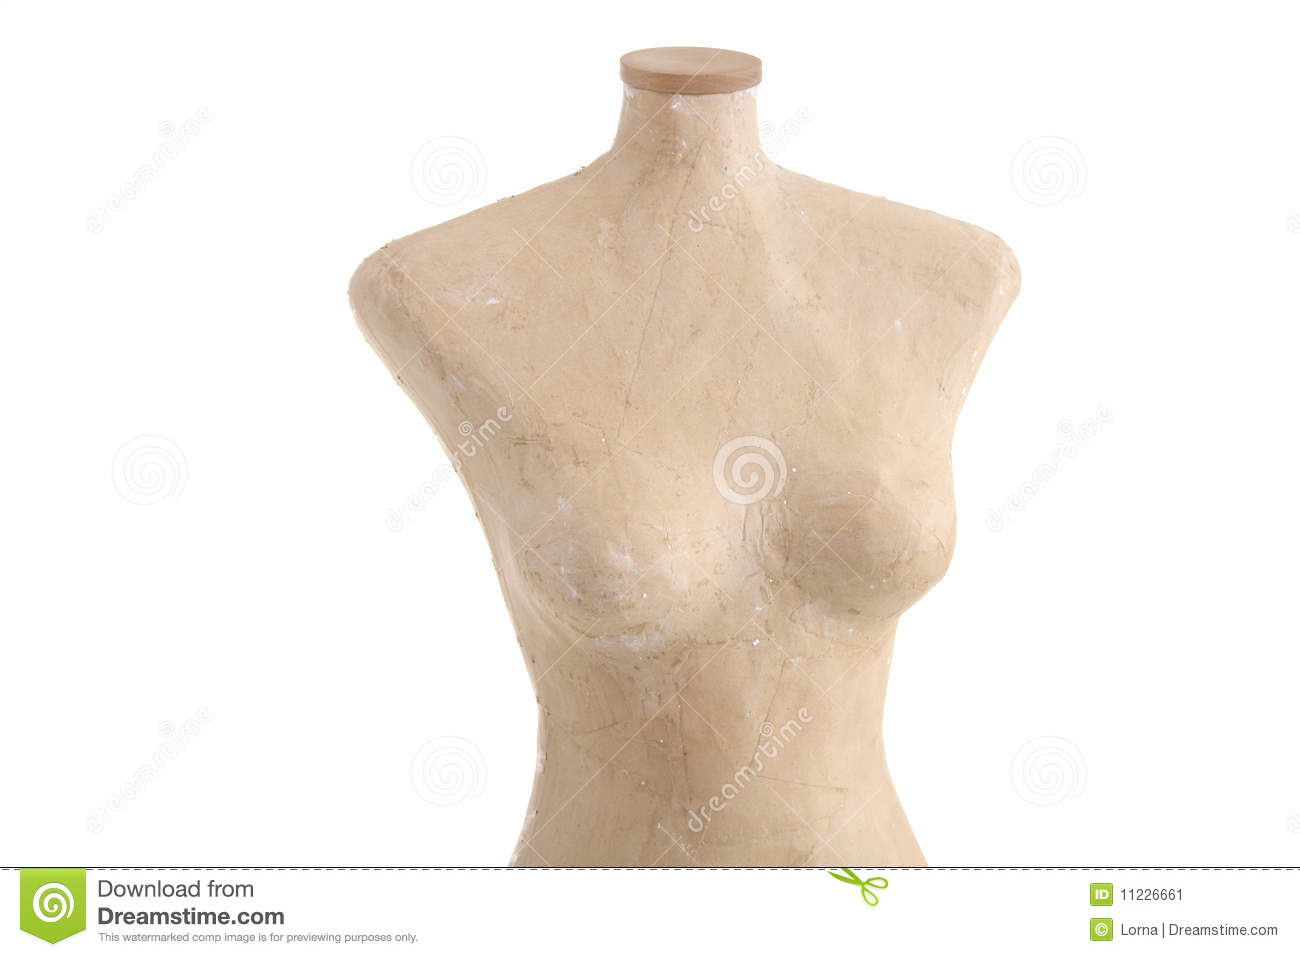 Tailors Dummy Mannequin Isolated Stock Image   Image  11226661